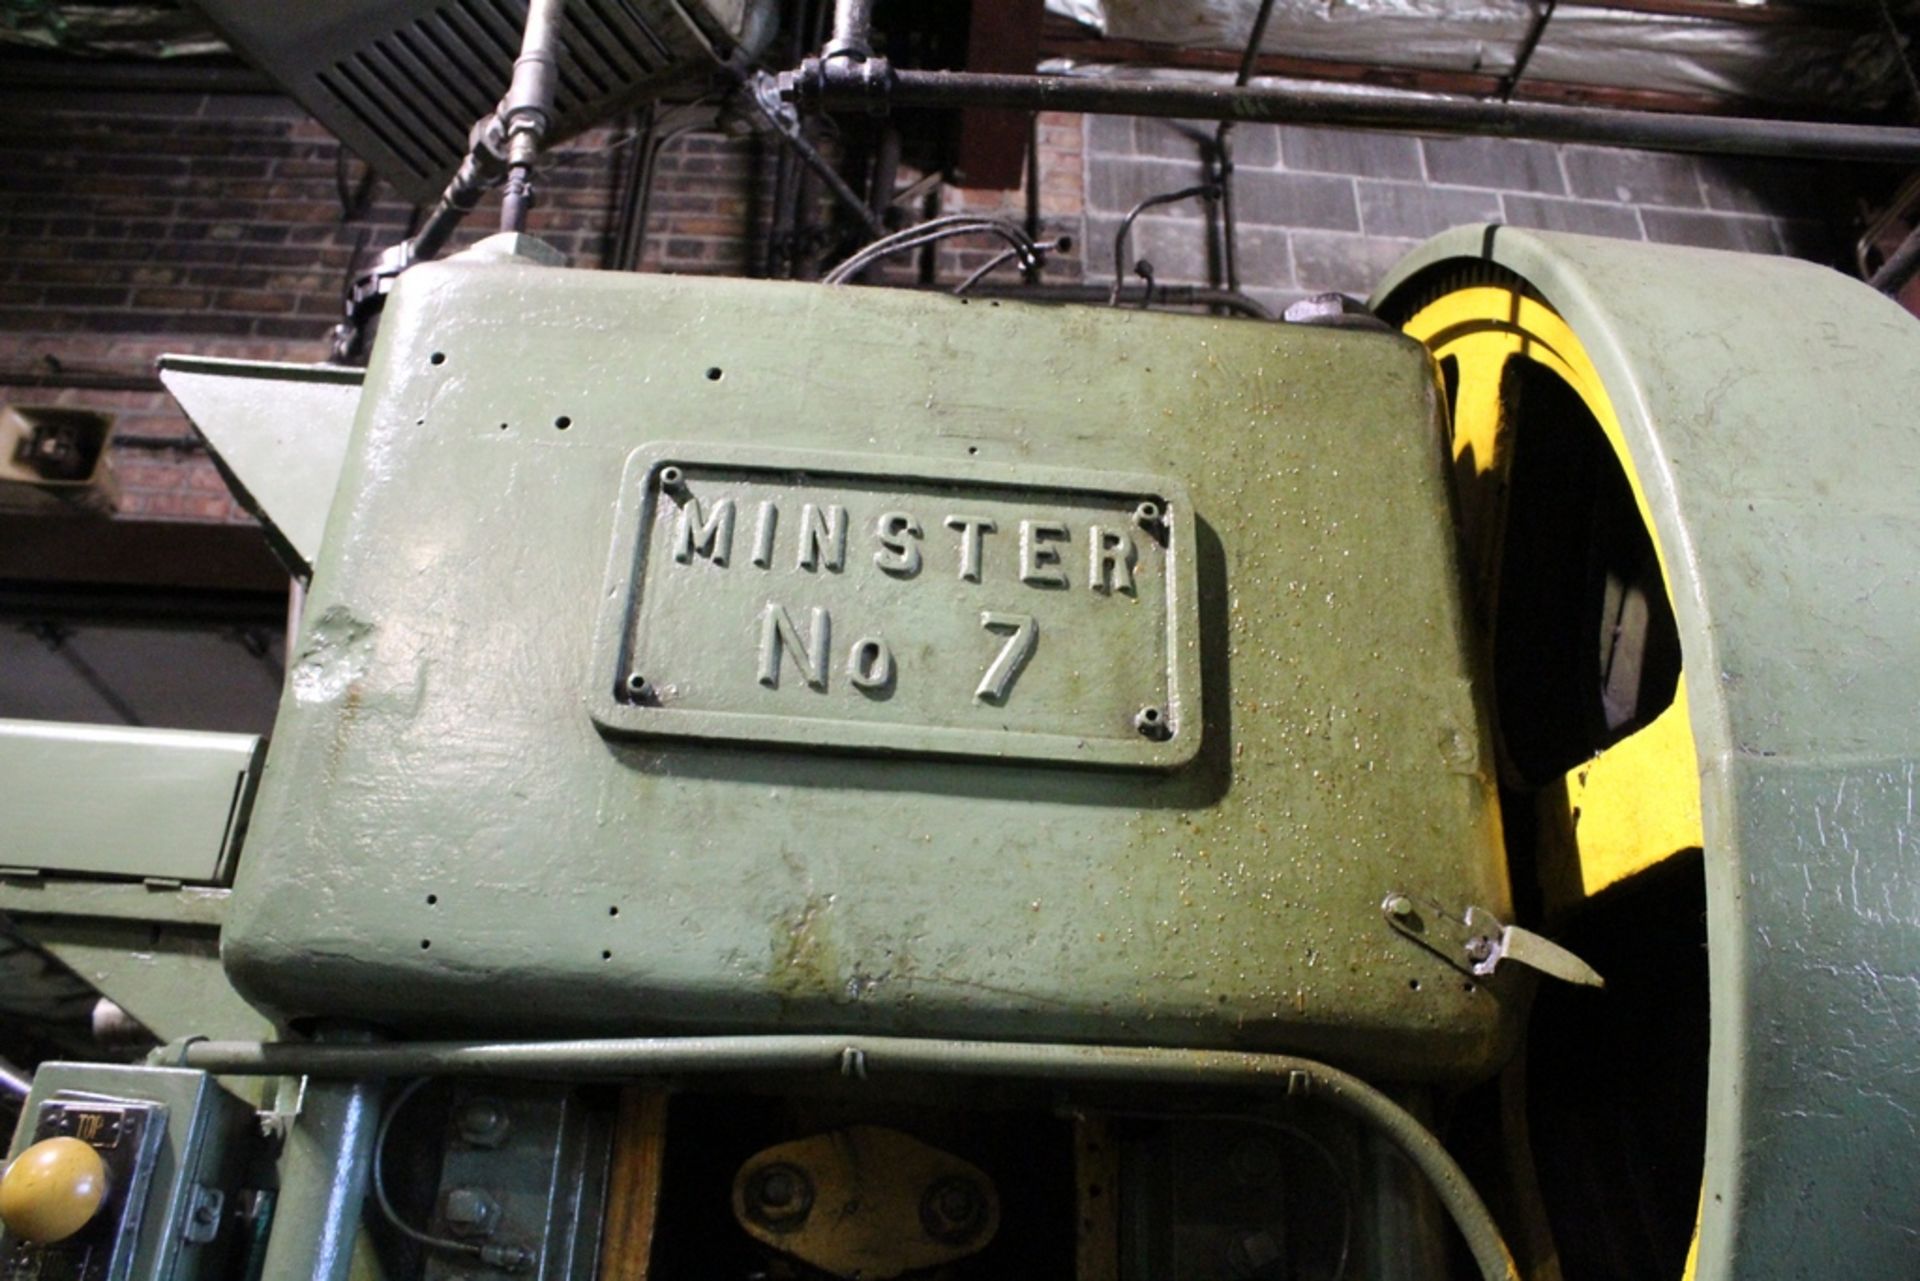 MINSTER 75 TON APPROX. NO. 70 GAP PRESS, S/N 7-4173, 6” STROKE, 22”X38”X2” BOLSTER, AIR CLUTCH, - Image 3 of 6